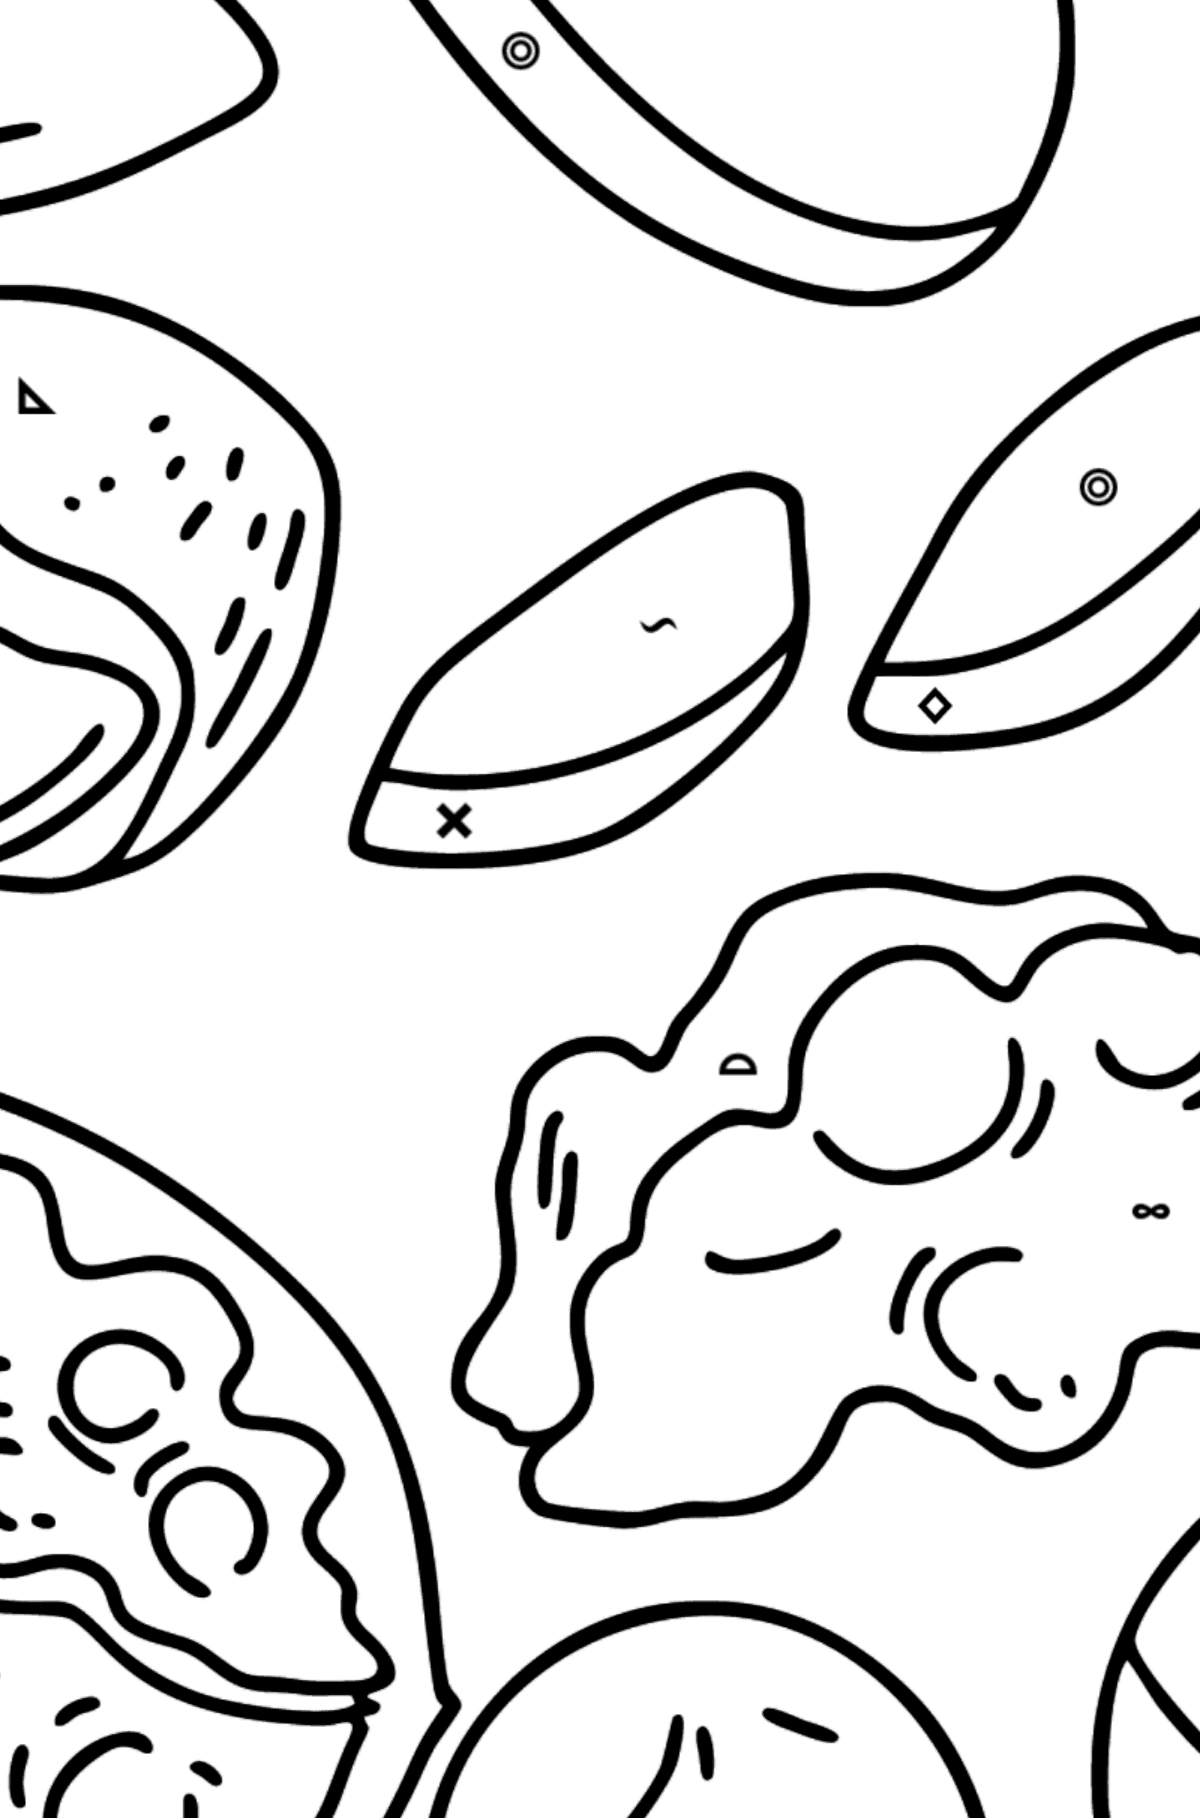 Nuts: Walnuts, Macadamia, Almonds and Peanuts coloring page - Coloring by Symbols and Geometric Shapes for Kids